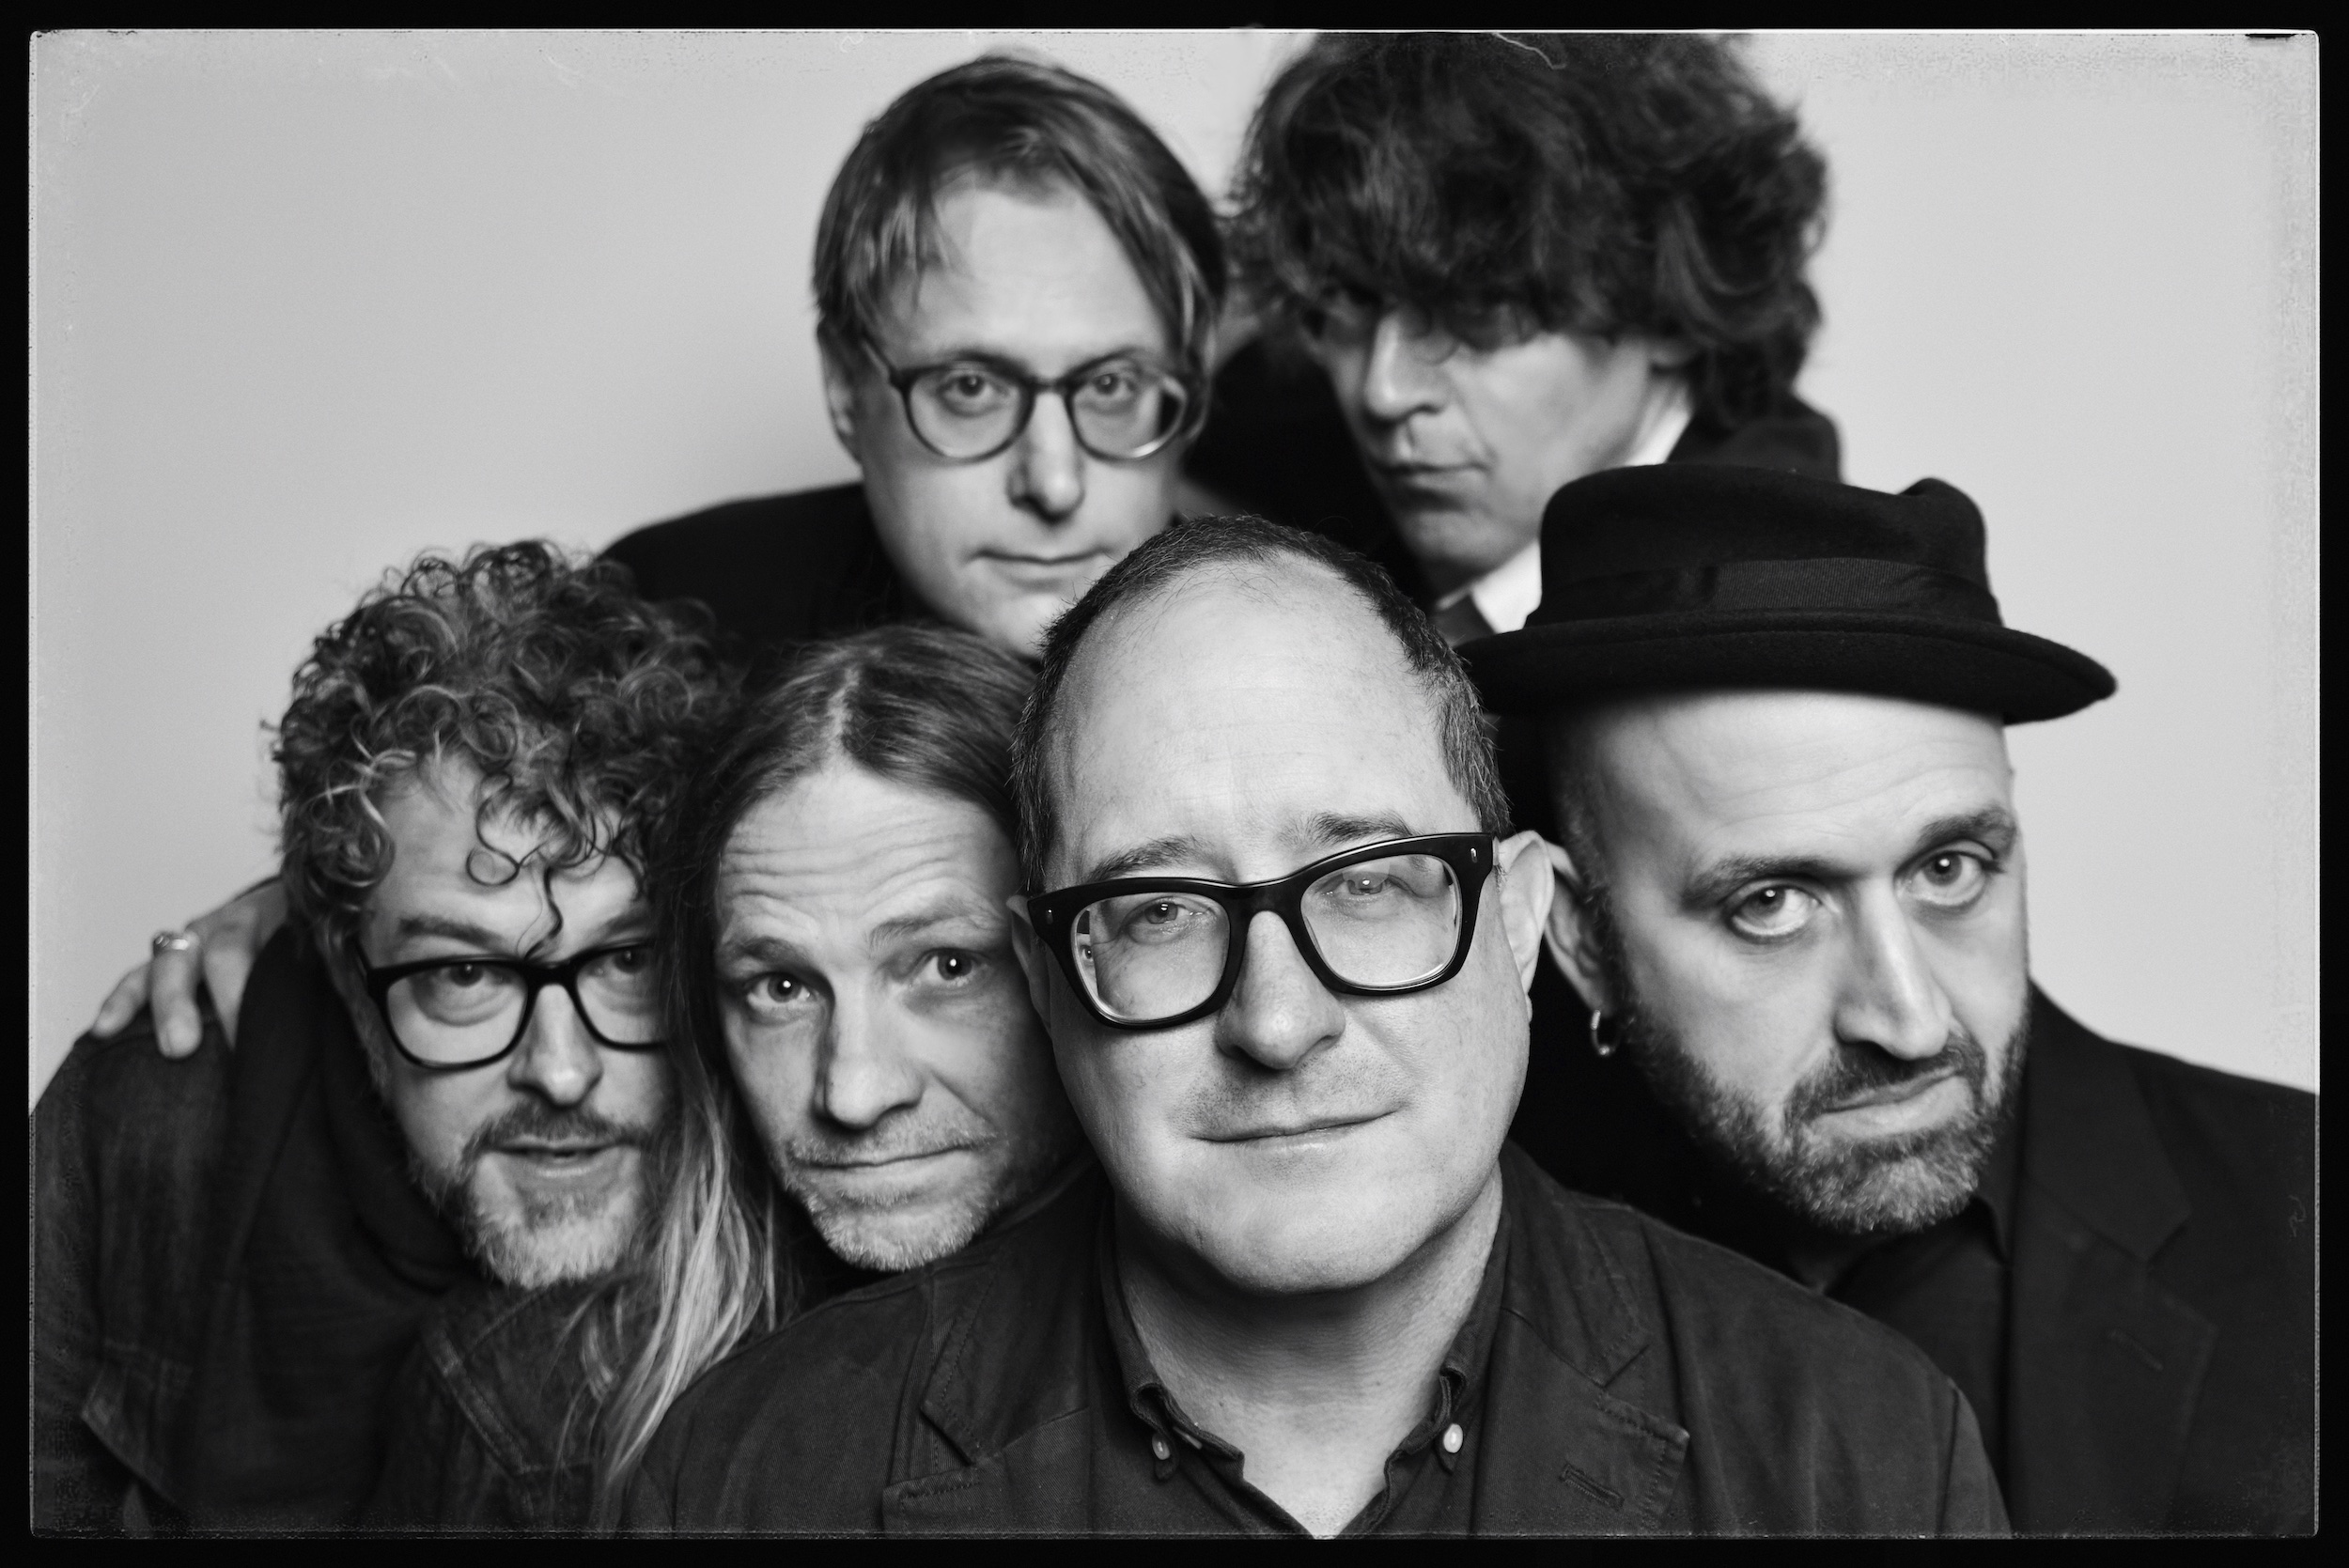 The Hold Steady | Thanks for listening, thanks for understanding.